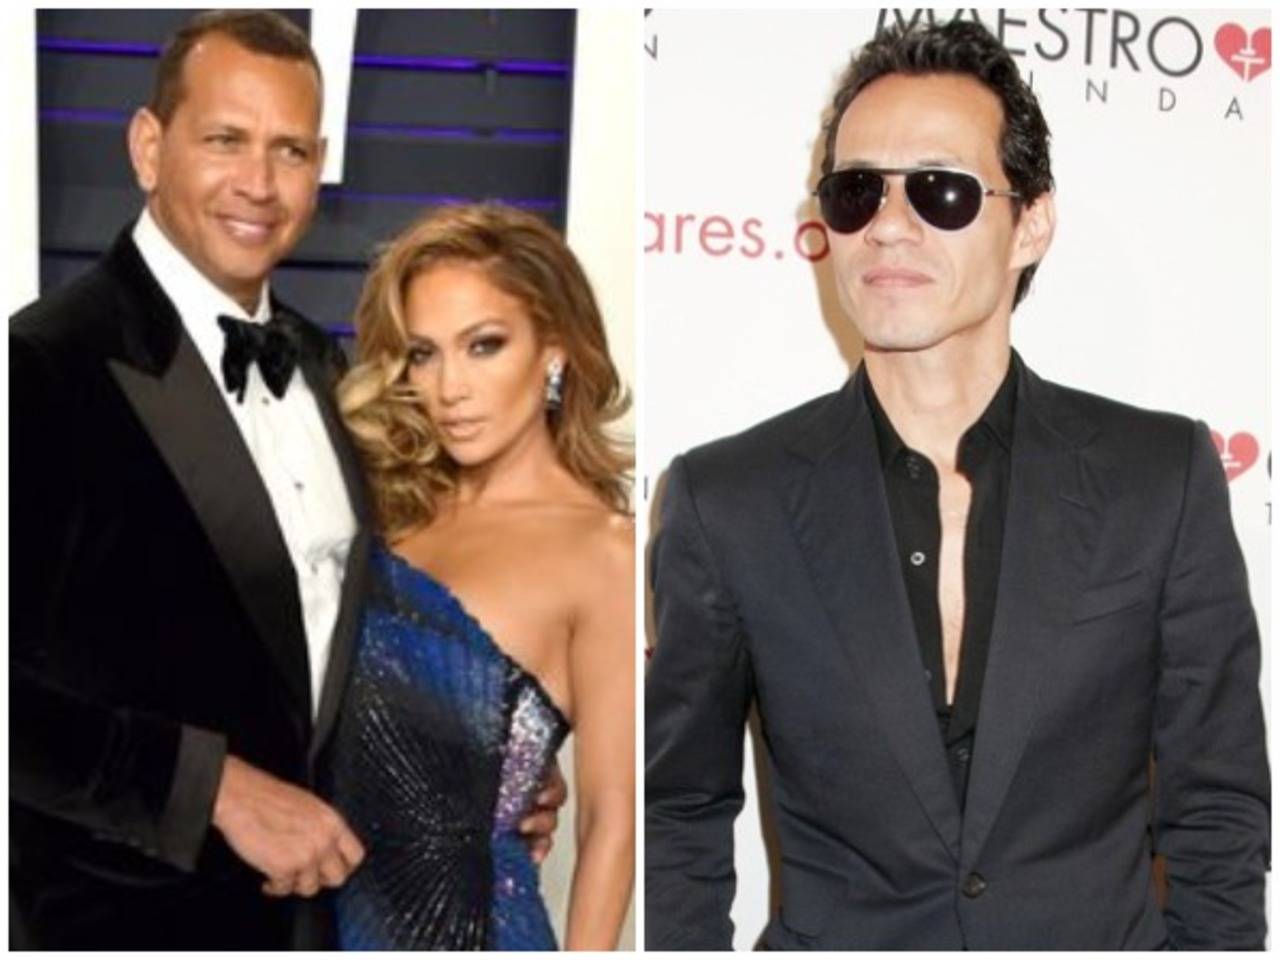 J.Lo, A-Rod and Marc Anthony Reunite at Children's Recital